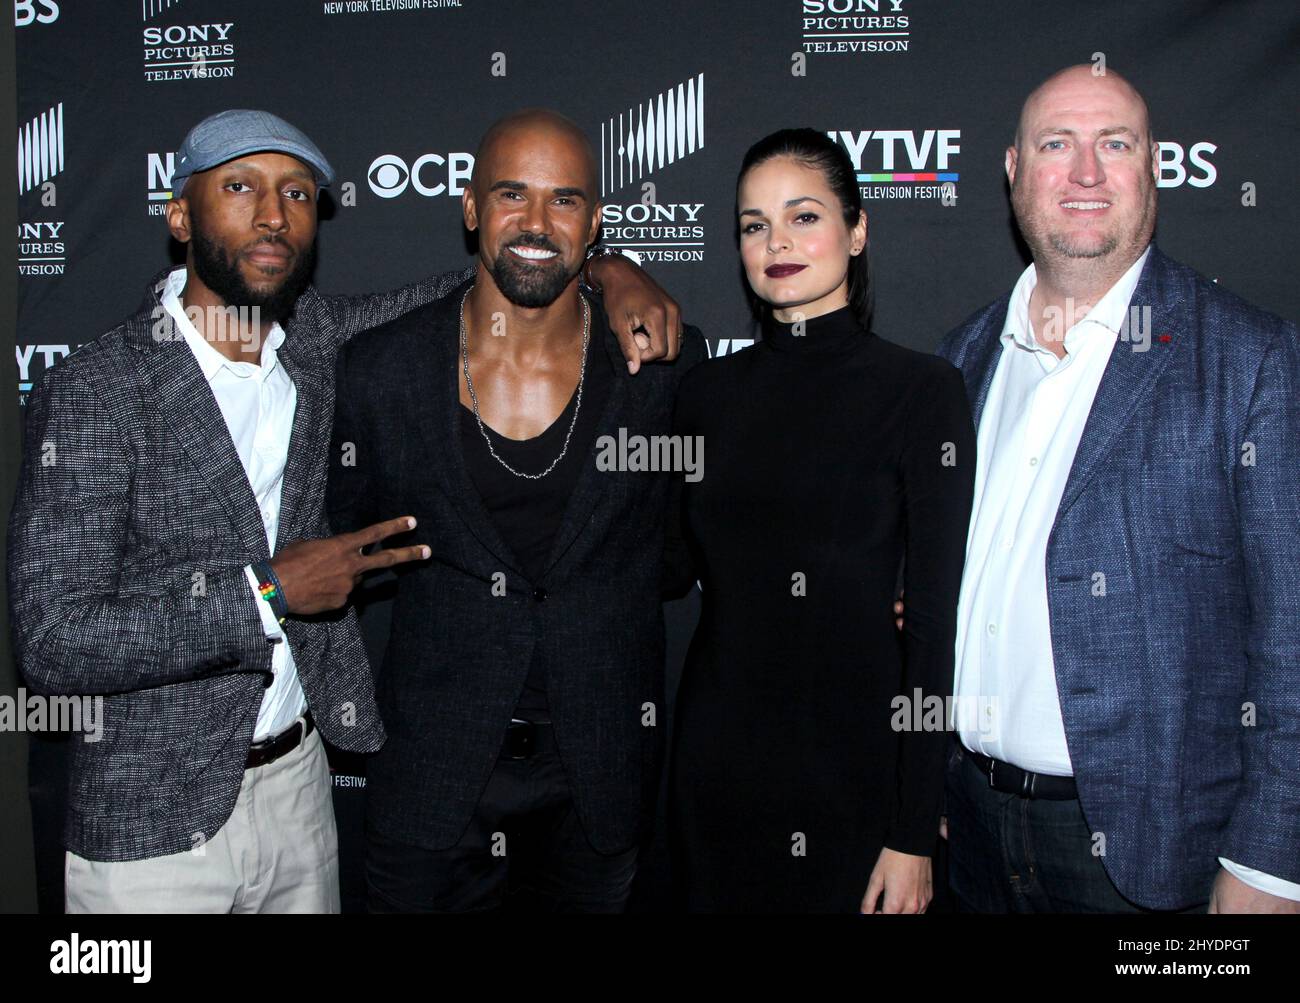 Aaron Rahsaan Thomas, Shemar Moore, Lina Esco & Shawn Ryan attends the S.W.A.T. World Premiere Held at the SVA Theatre on October 24, 2017 Stock Photo